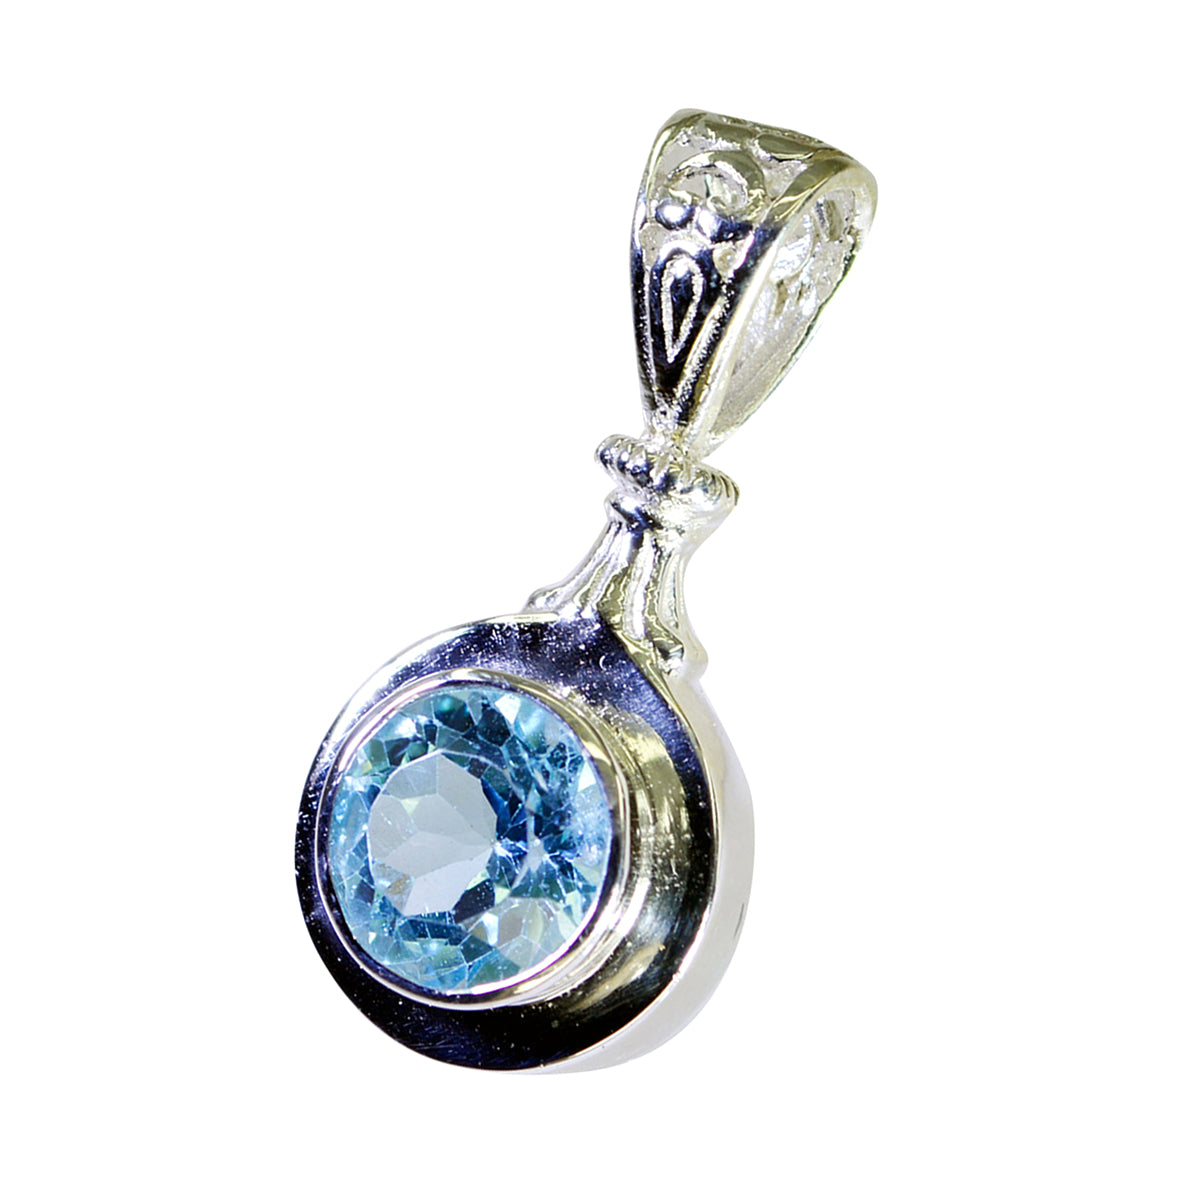 Riyo Cute Gemstone Round Faceted Blue Blue Topaz Sterling Silver Pendant Gift For Women